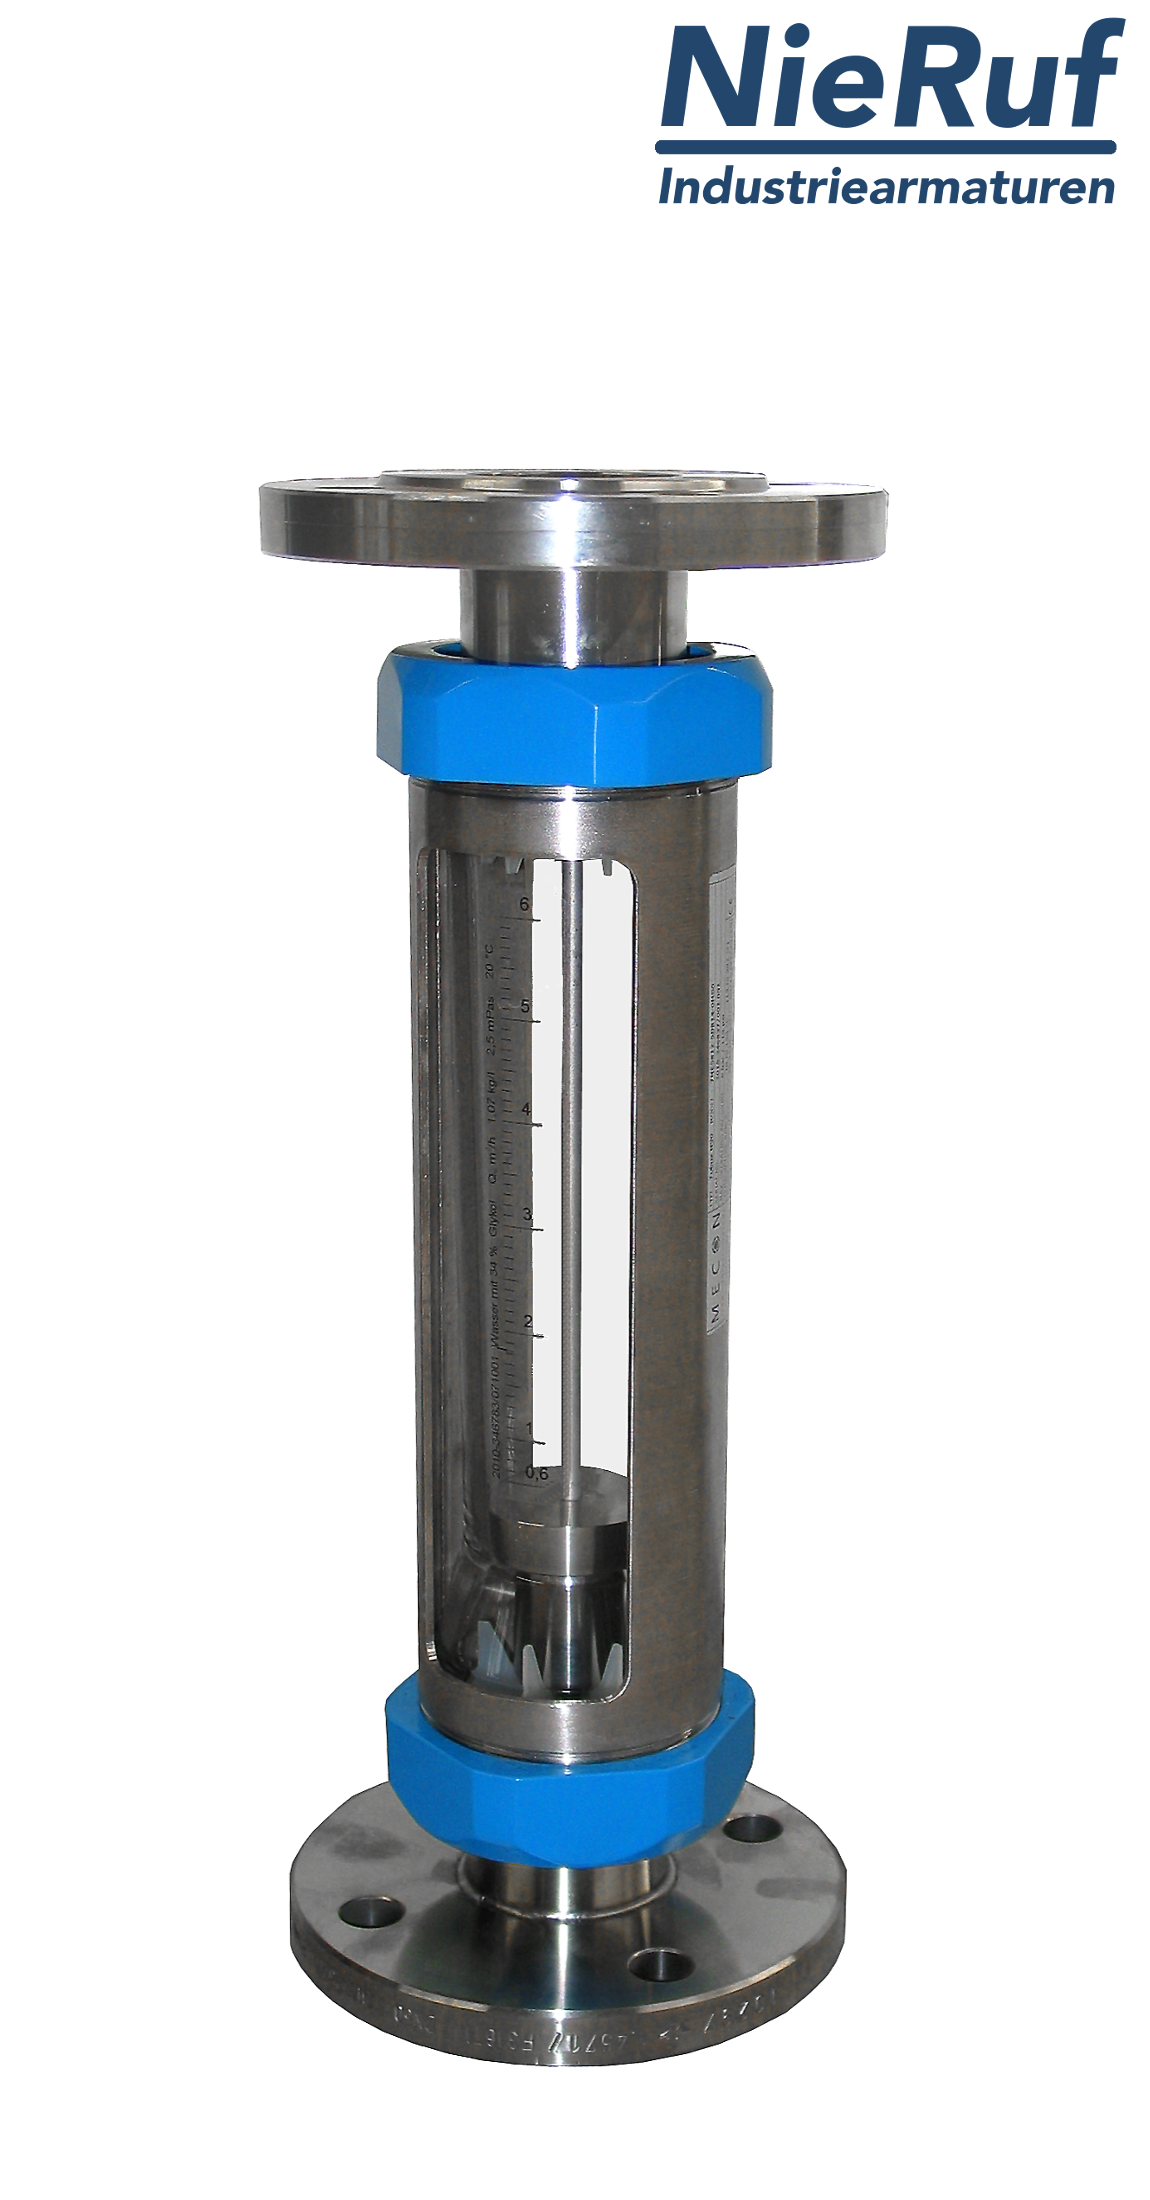 Variable area flowmeter stainless steel + borosilicate flange DN10 6.5 - 65.0 l/h water FKM